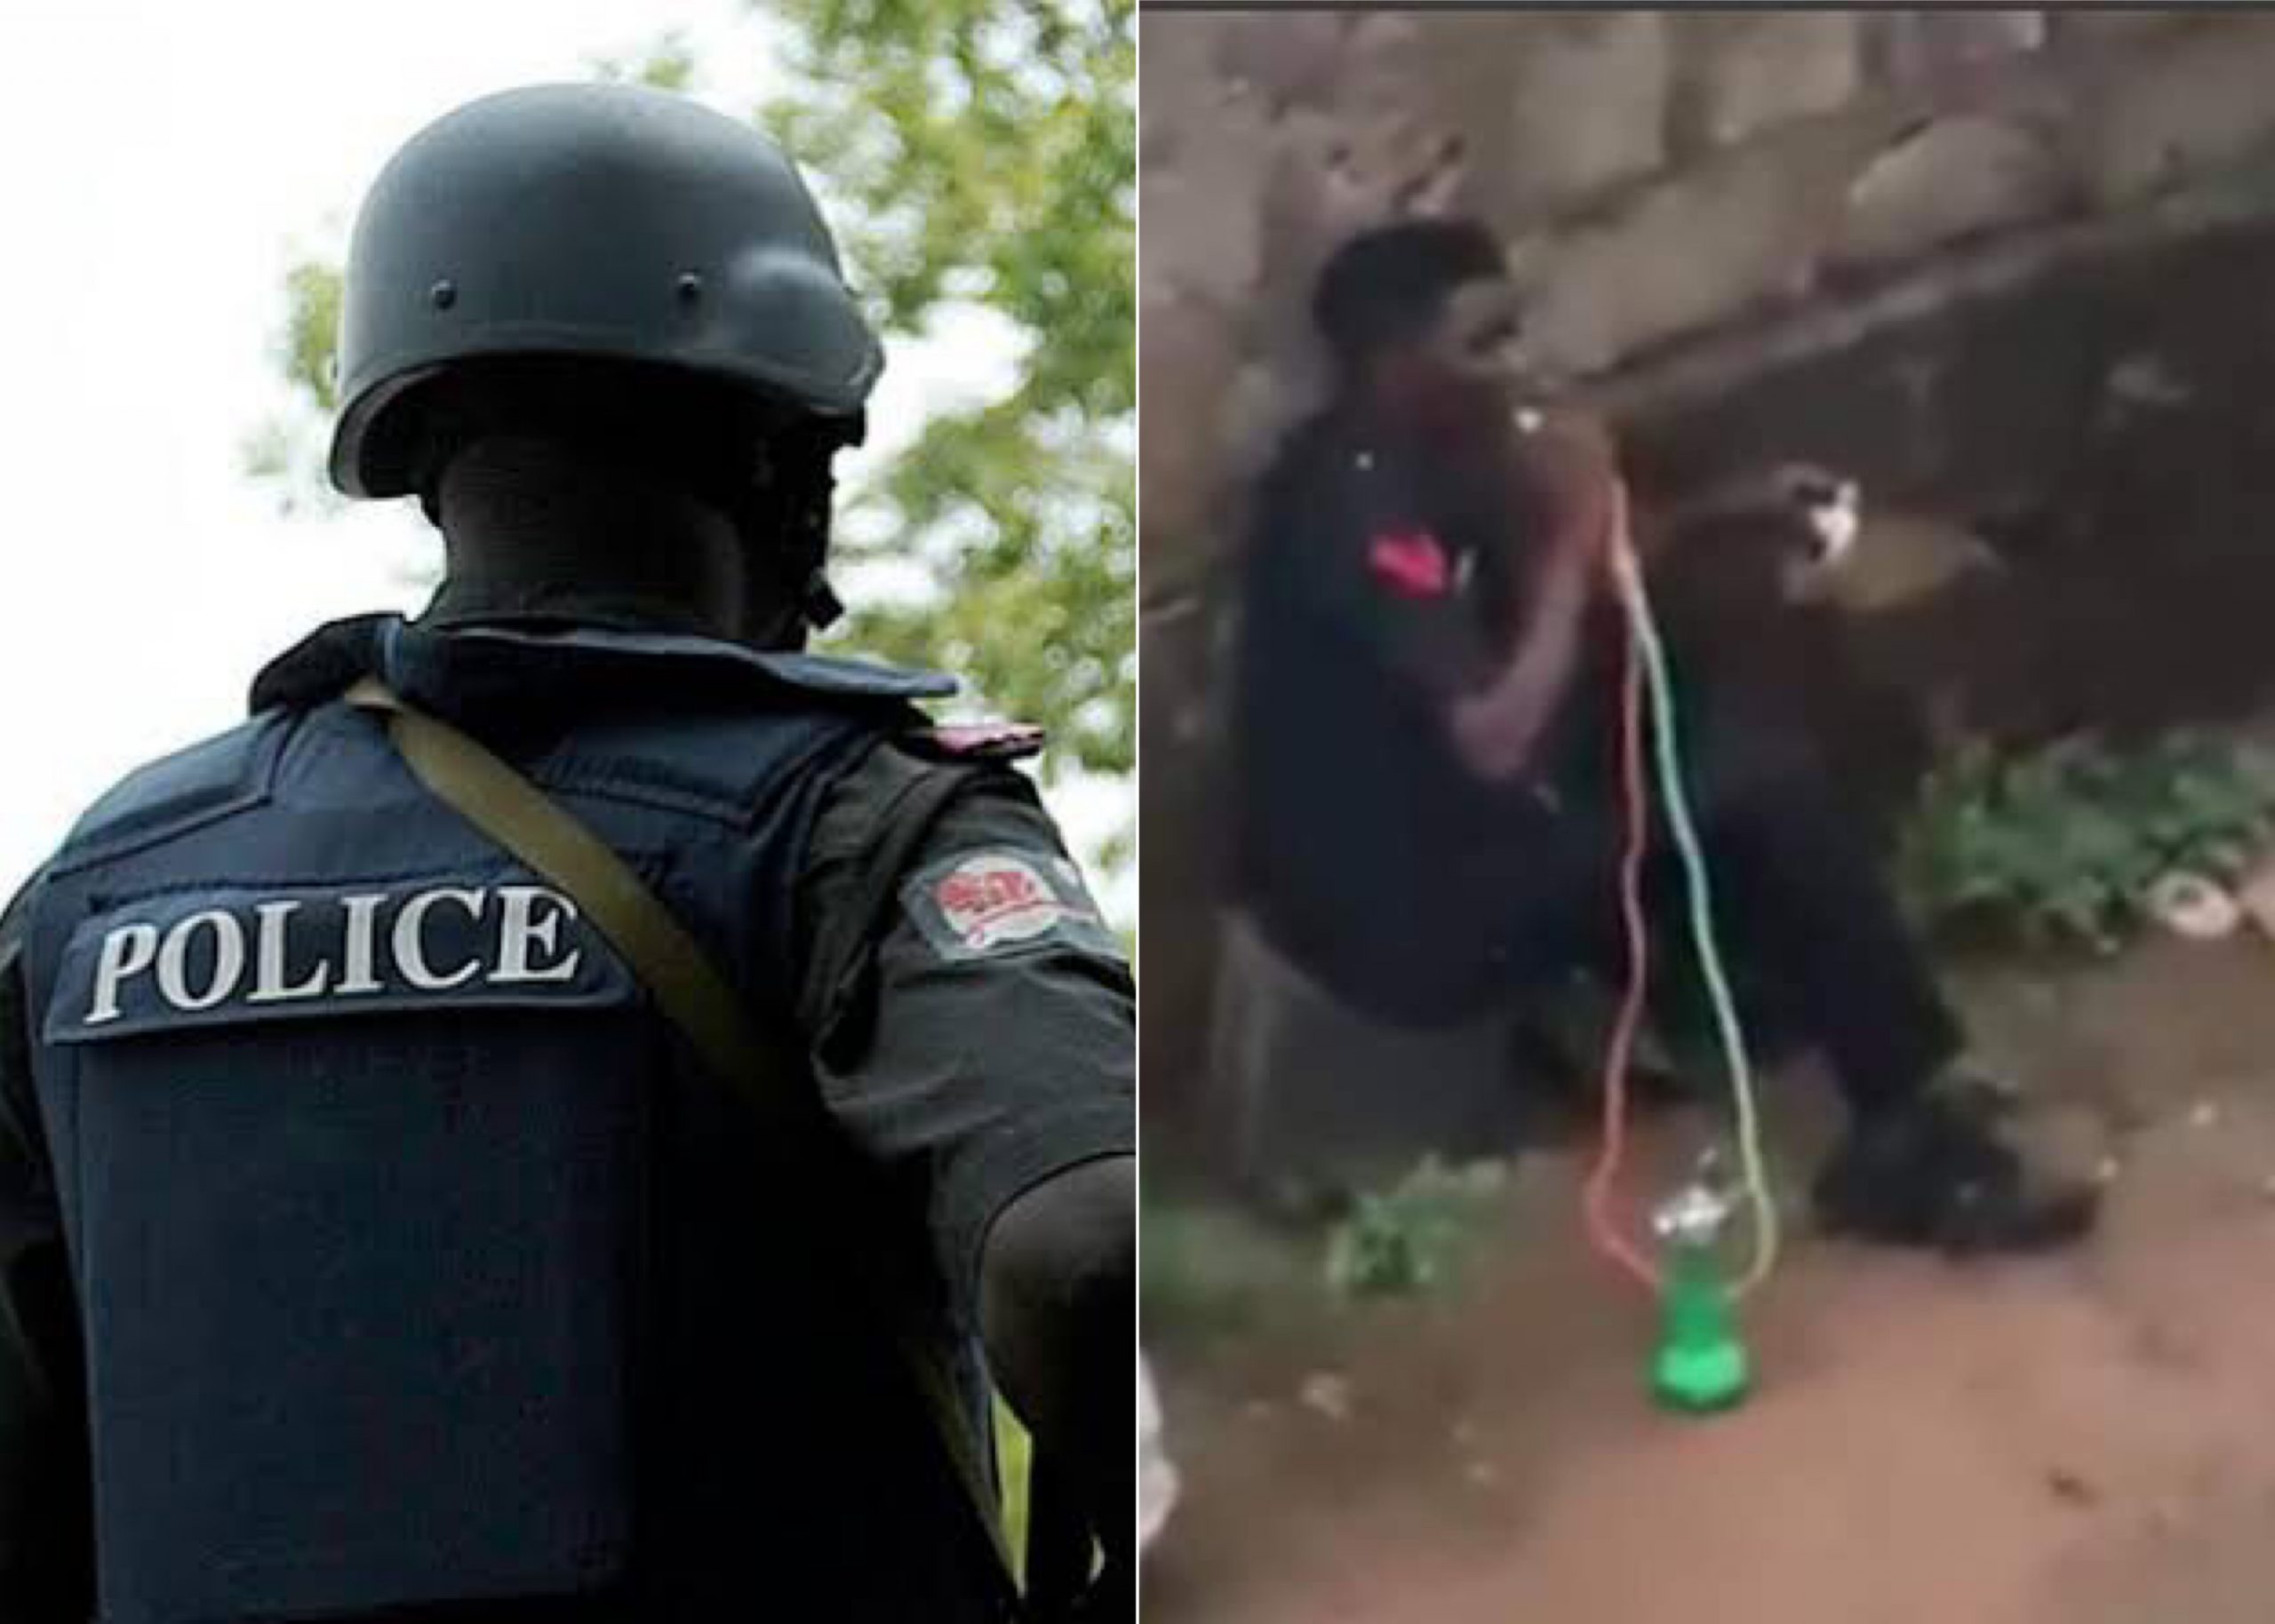 Police Commence Investigation Into Viral Video Of Man Wearing Police Uniform Smoking Shisha